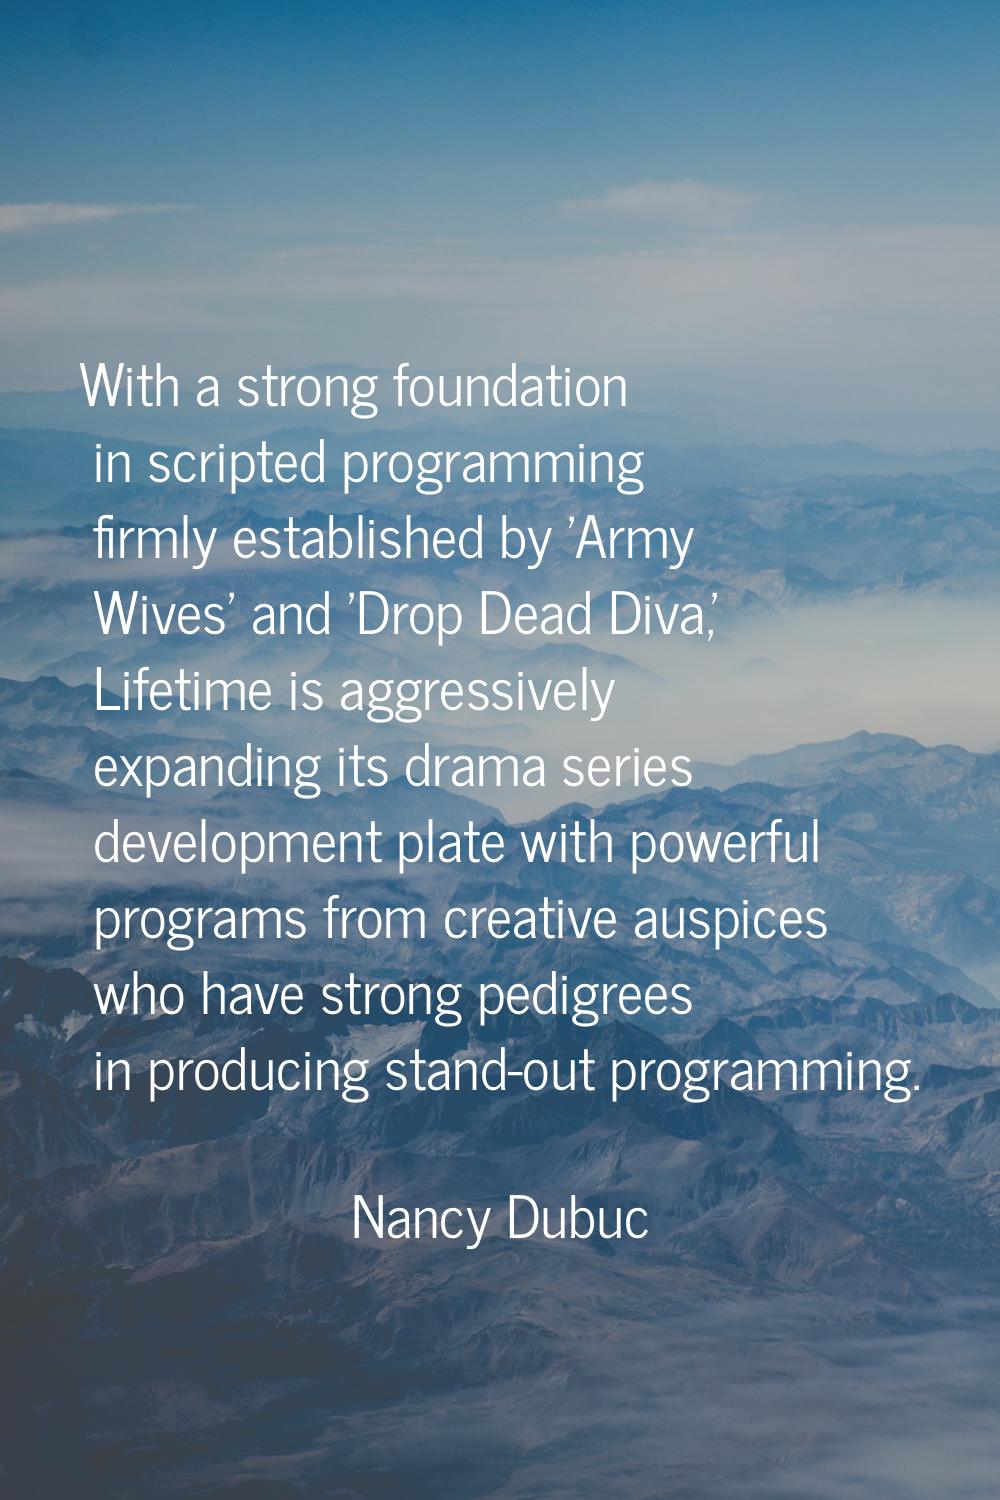 With a strong foundation in scripted programming firmly established by 'Army Wives' and 'Drop Dead 